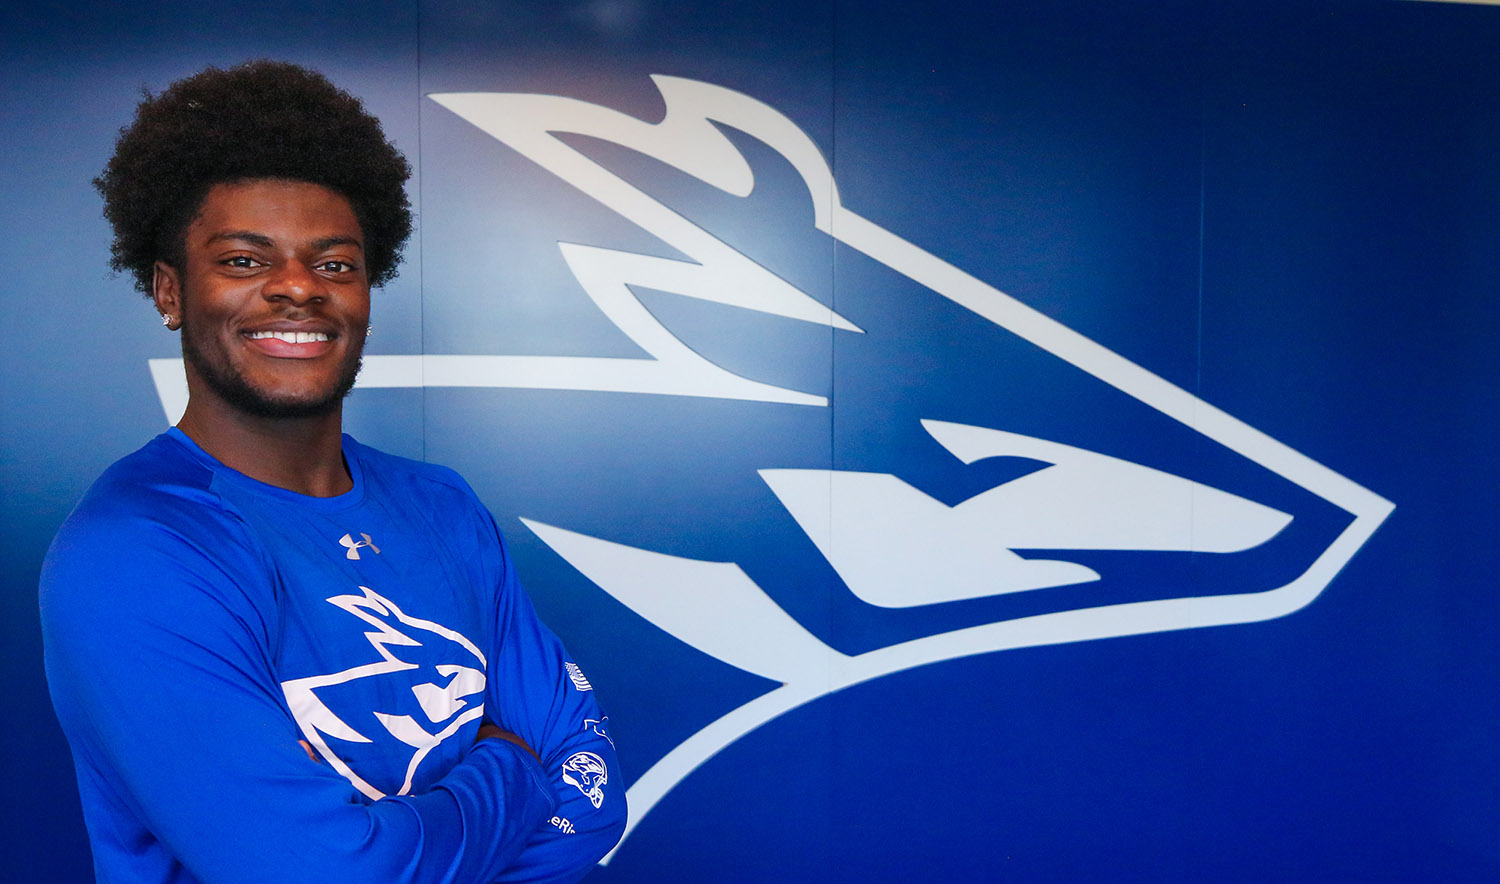 Gabriel Amegatcher is taking full advantage of the opportunities UNK provides. The redshirt sophomore defensive back serves as a success coach for the football team and he’s involved with the Student-Athlete Advisory Committee, Men’s Project, Black Student Association and Fellowship of Christian Athletes.